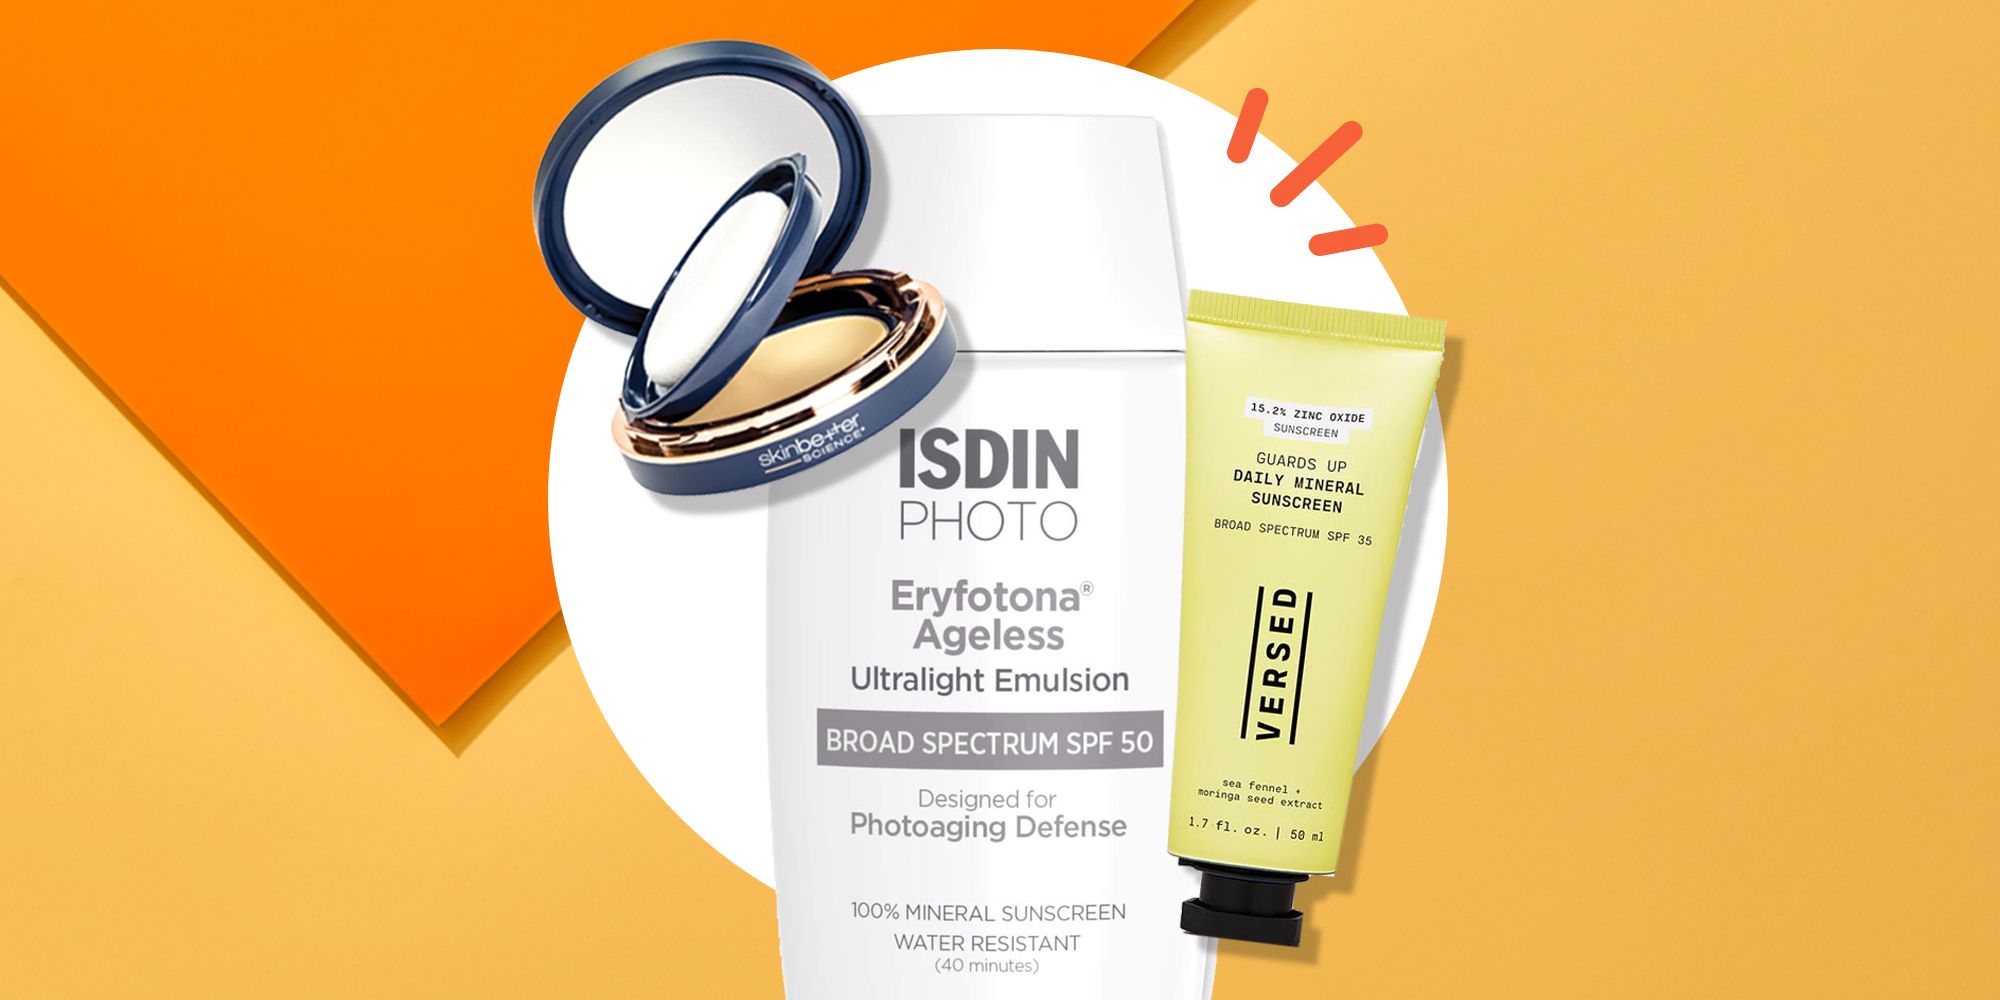 best tinted sunscreen for face sensitive skin